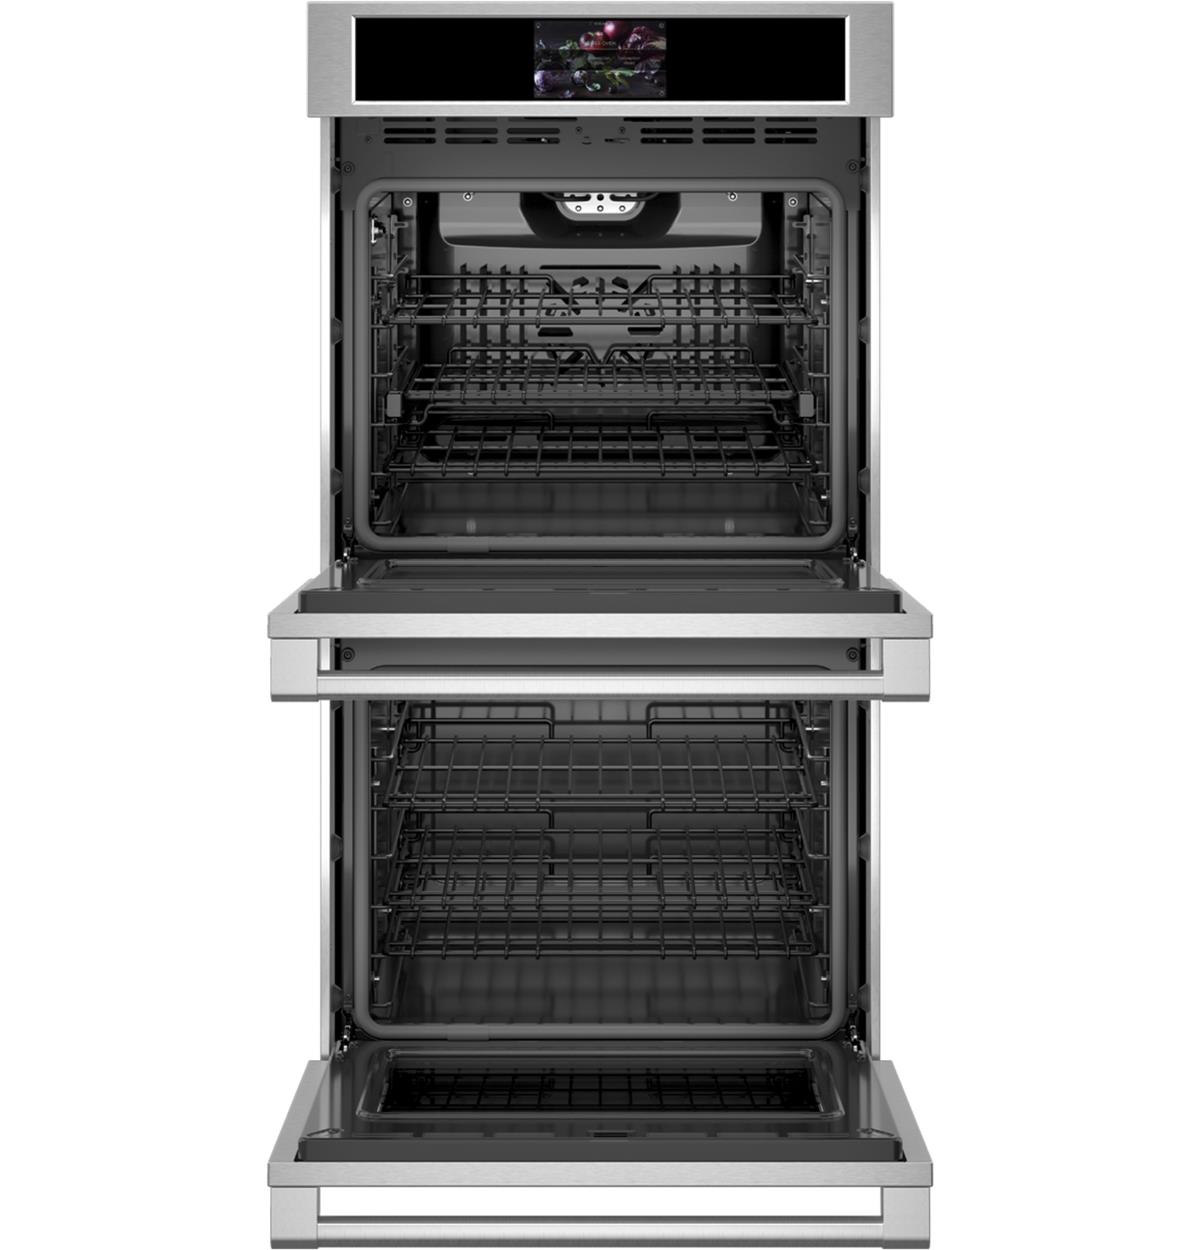 Monogram Electric convection double wall oven from the Statement Collection.